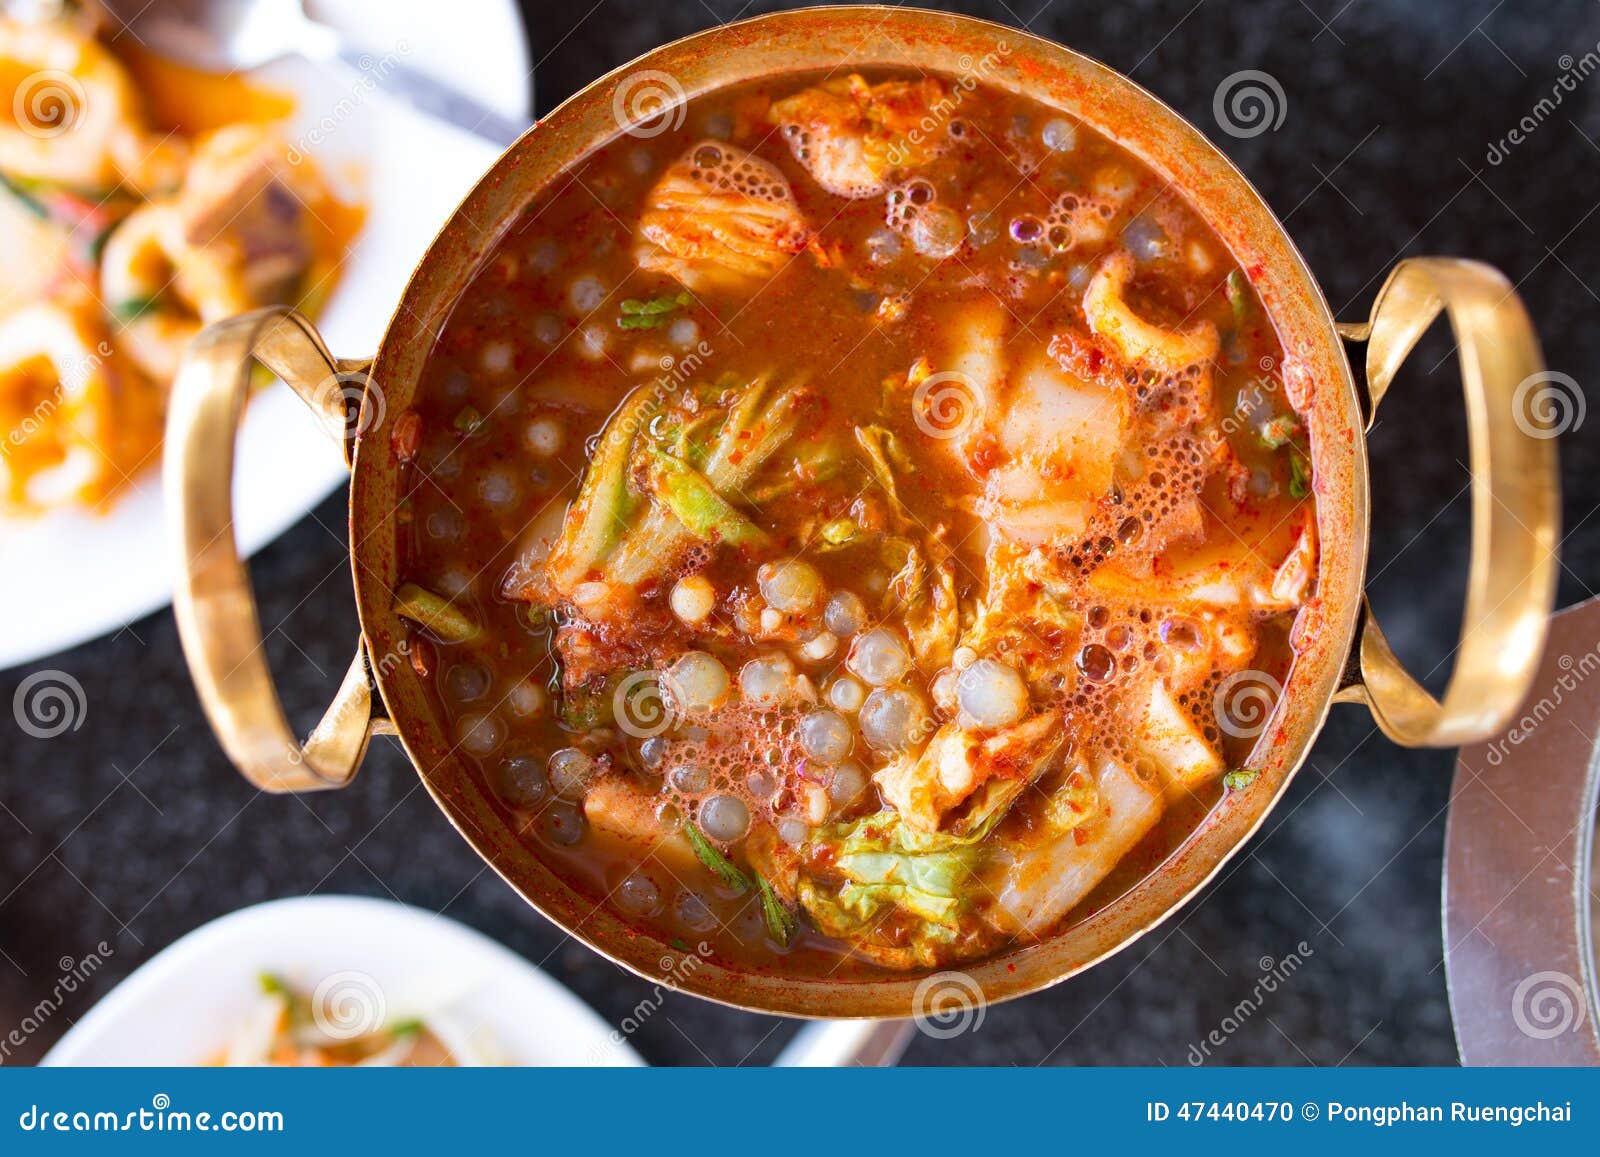 Sour soup with red caviar stock photo. Image of dish - 47440470